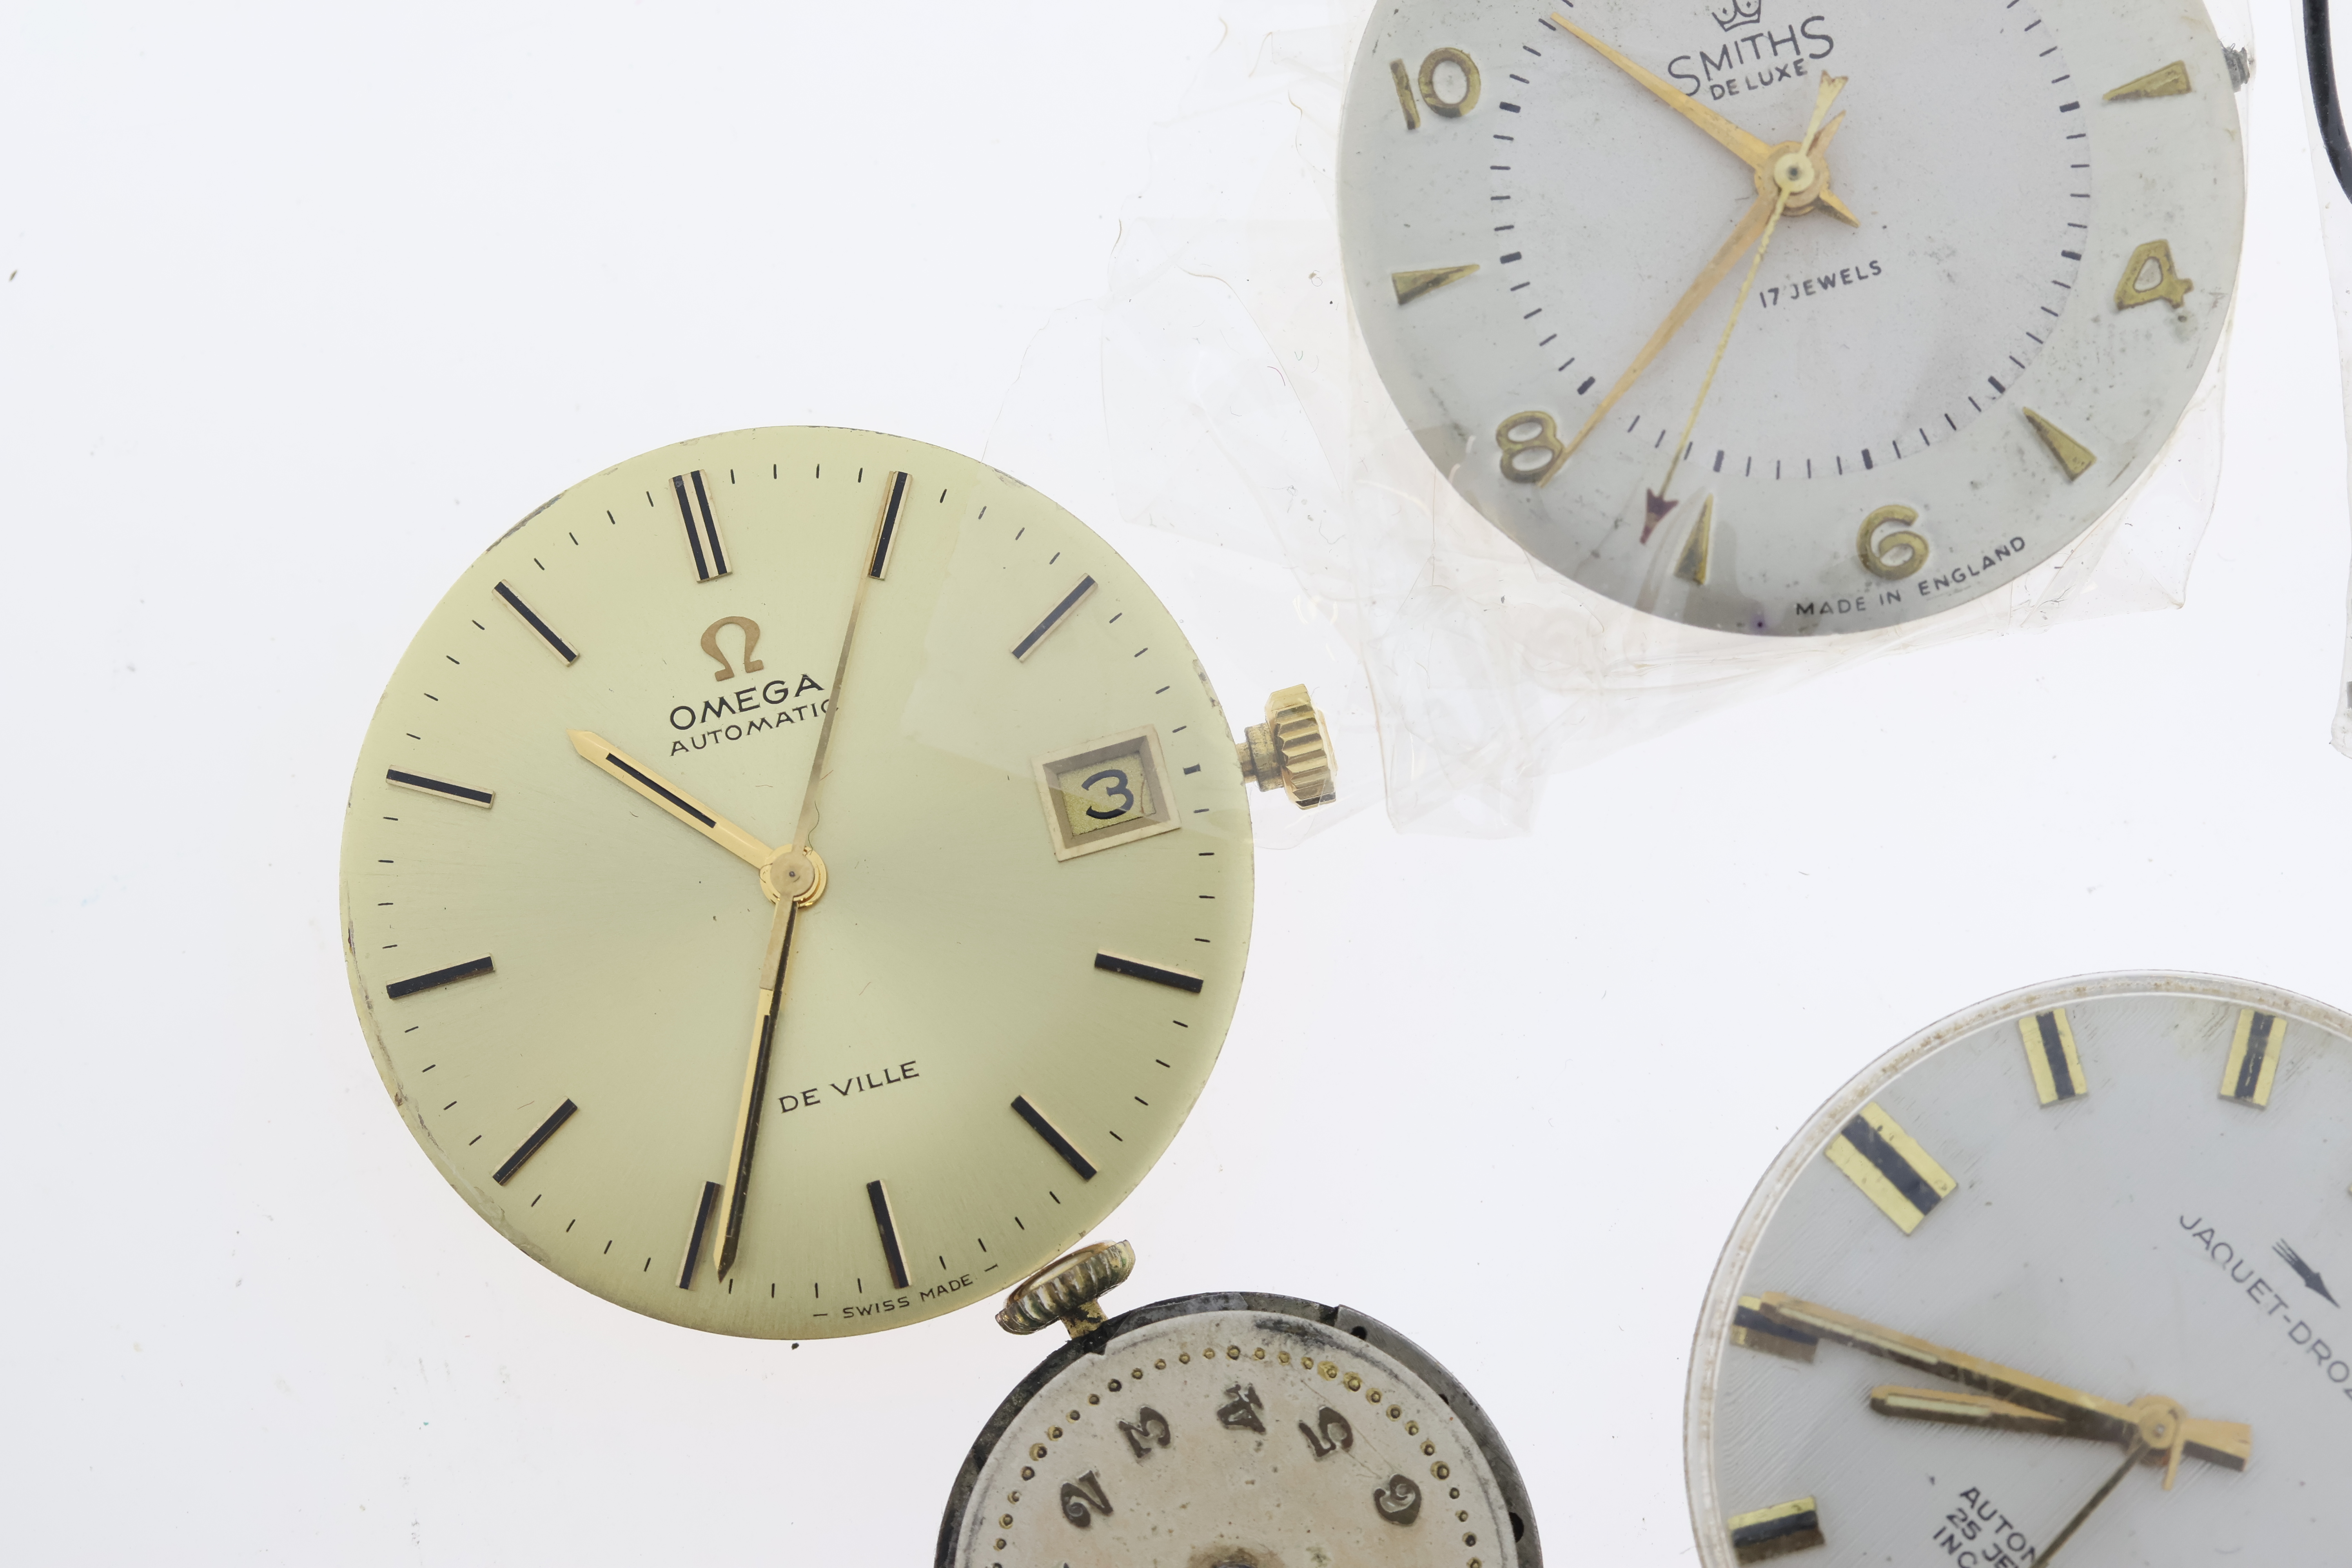 *TO BE SOLD WITHOUT RESERVE* Job lot of Movement & Dials, Including Omega & Jaquet Droz, *AS FOUND* - Image 2 of 6